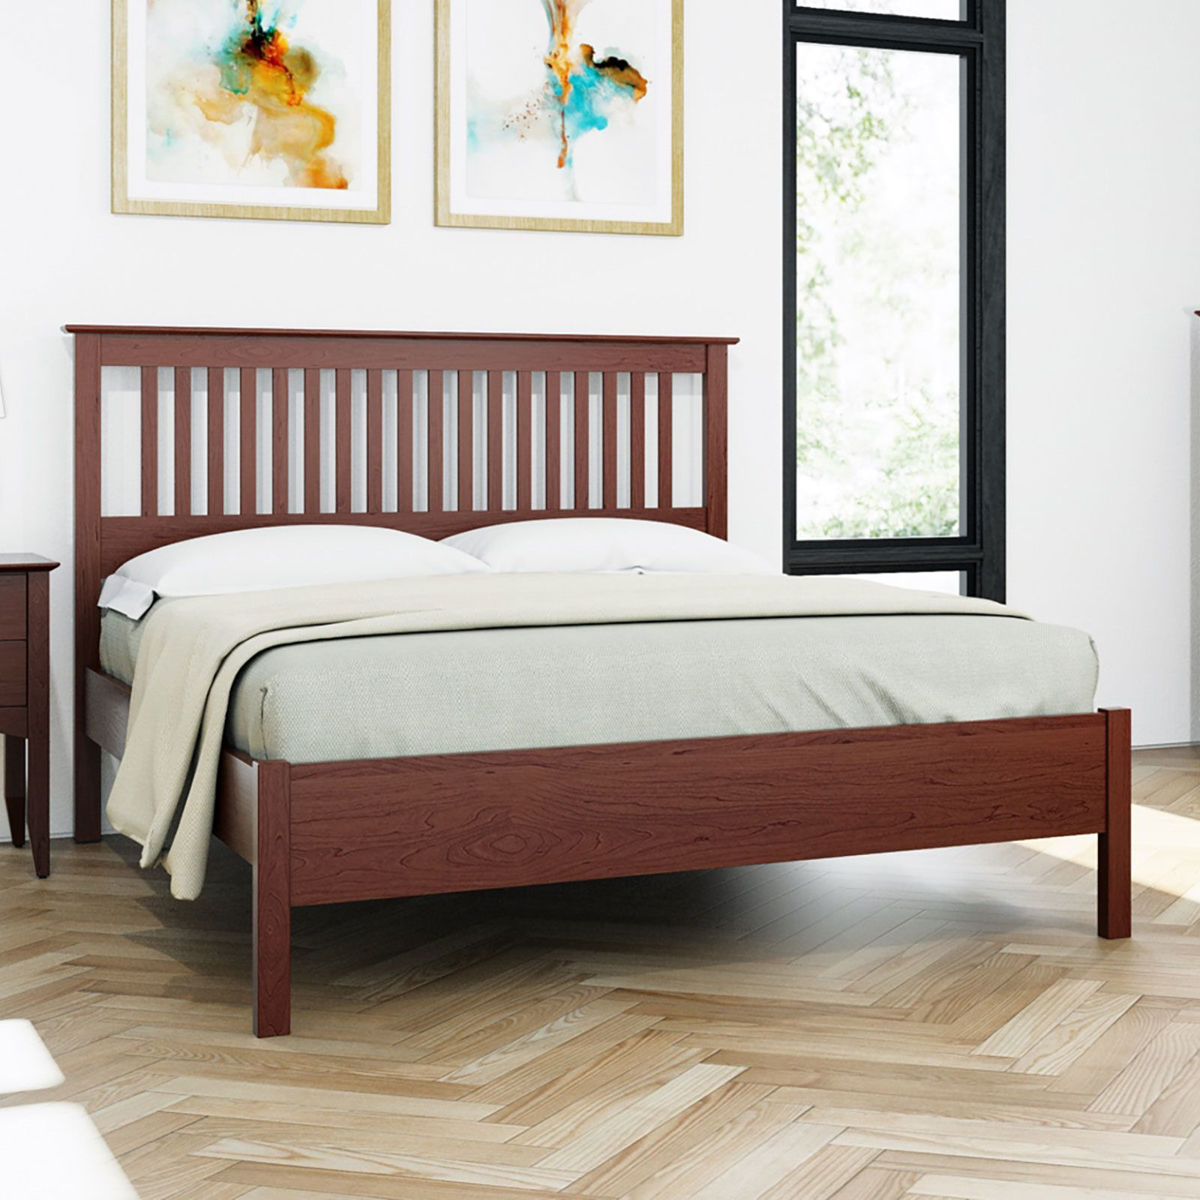 Picture of Urban Full Platform Bed